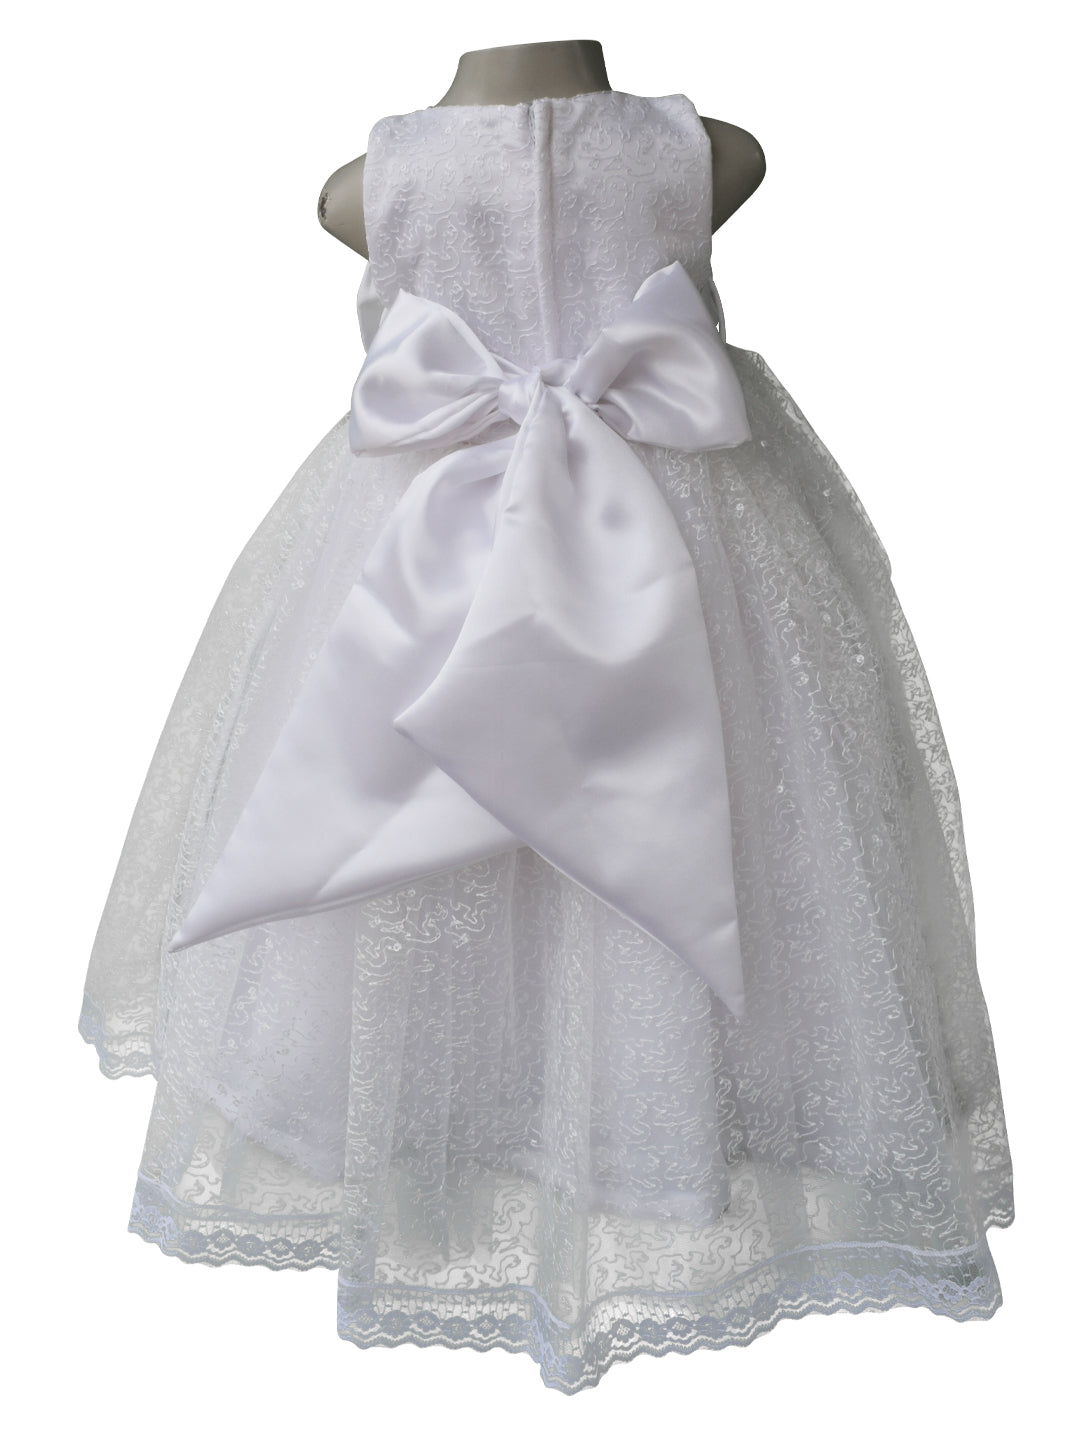 Ripening Baby-Girl's Satin Maxi White Kids Gown Birthday Party Dresses  for_7-8Years : Amazon.in: Fashion